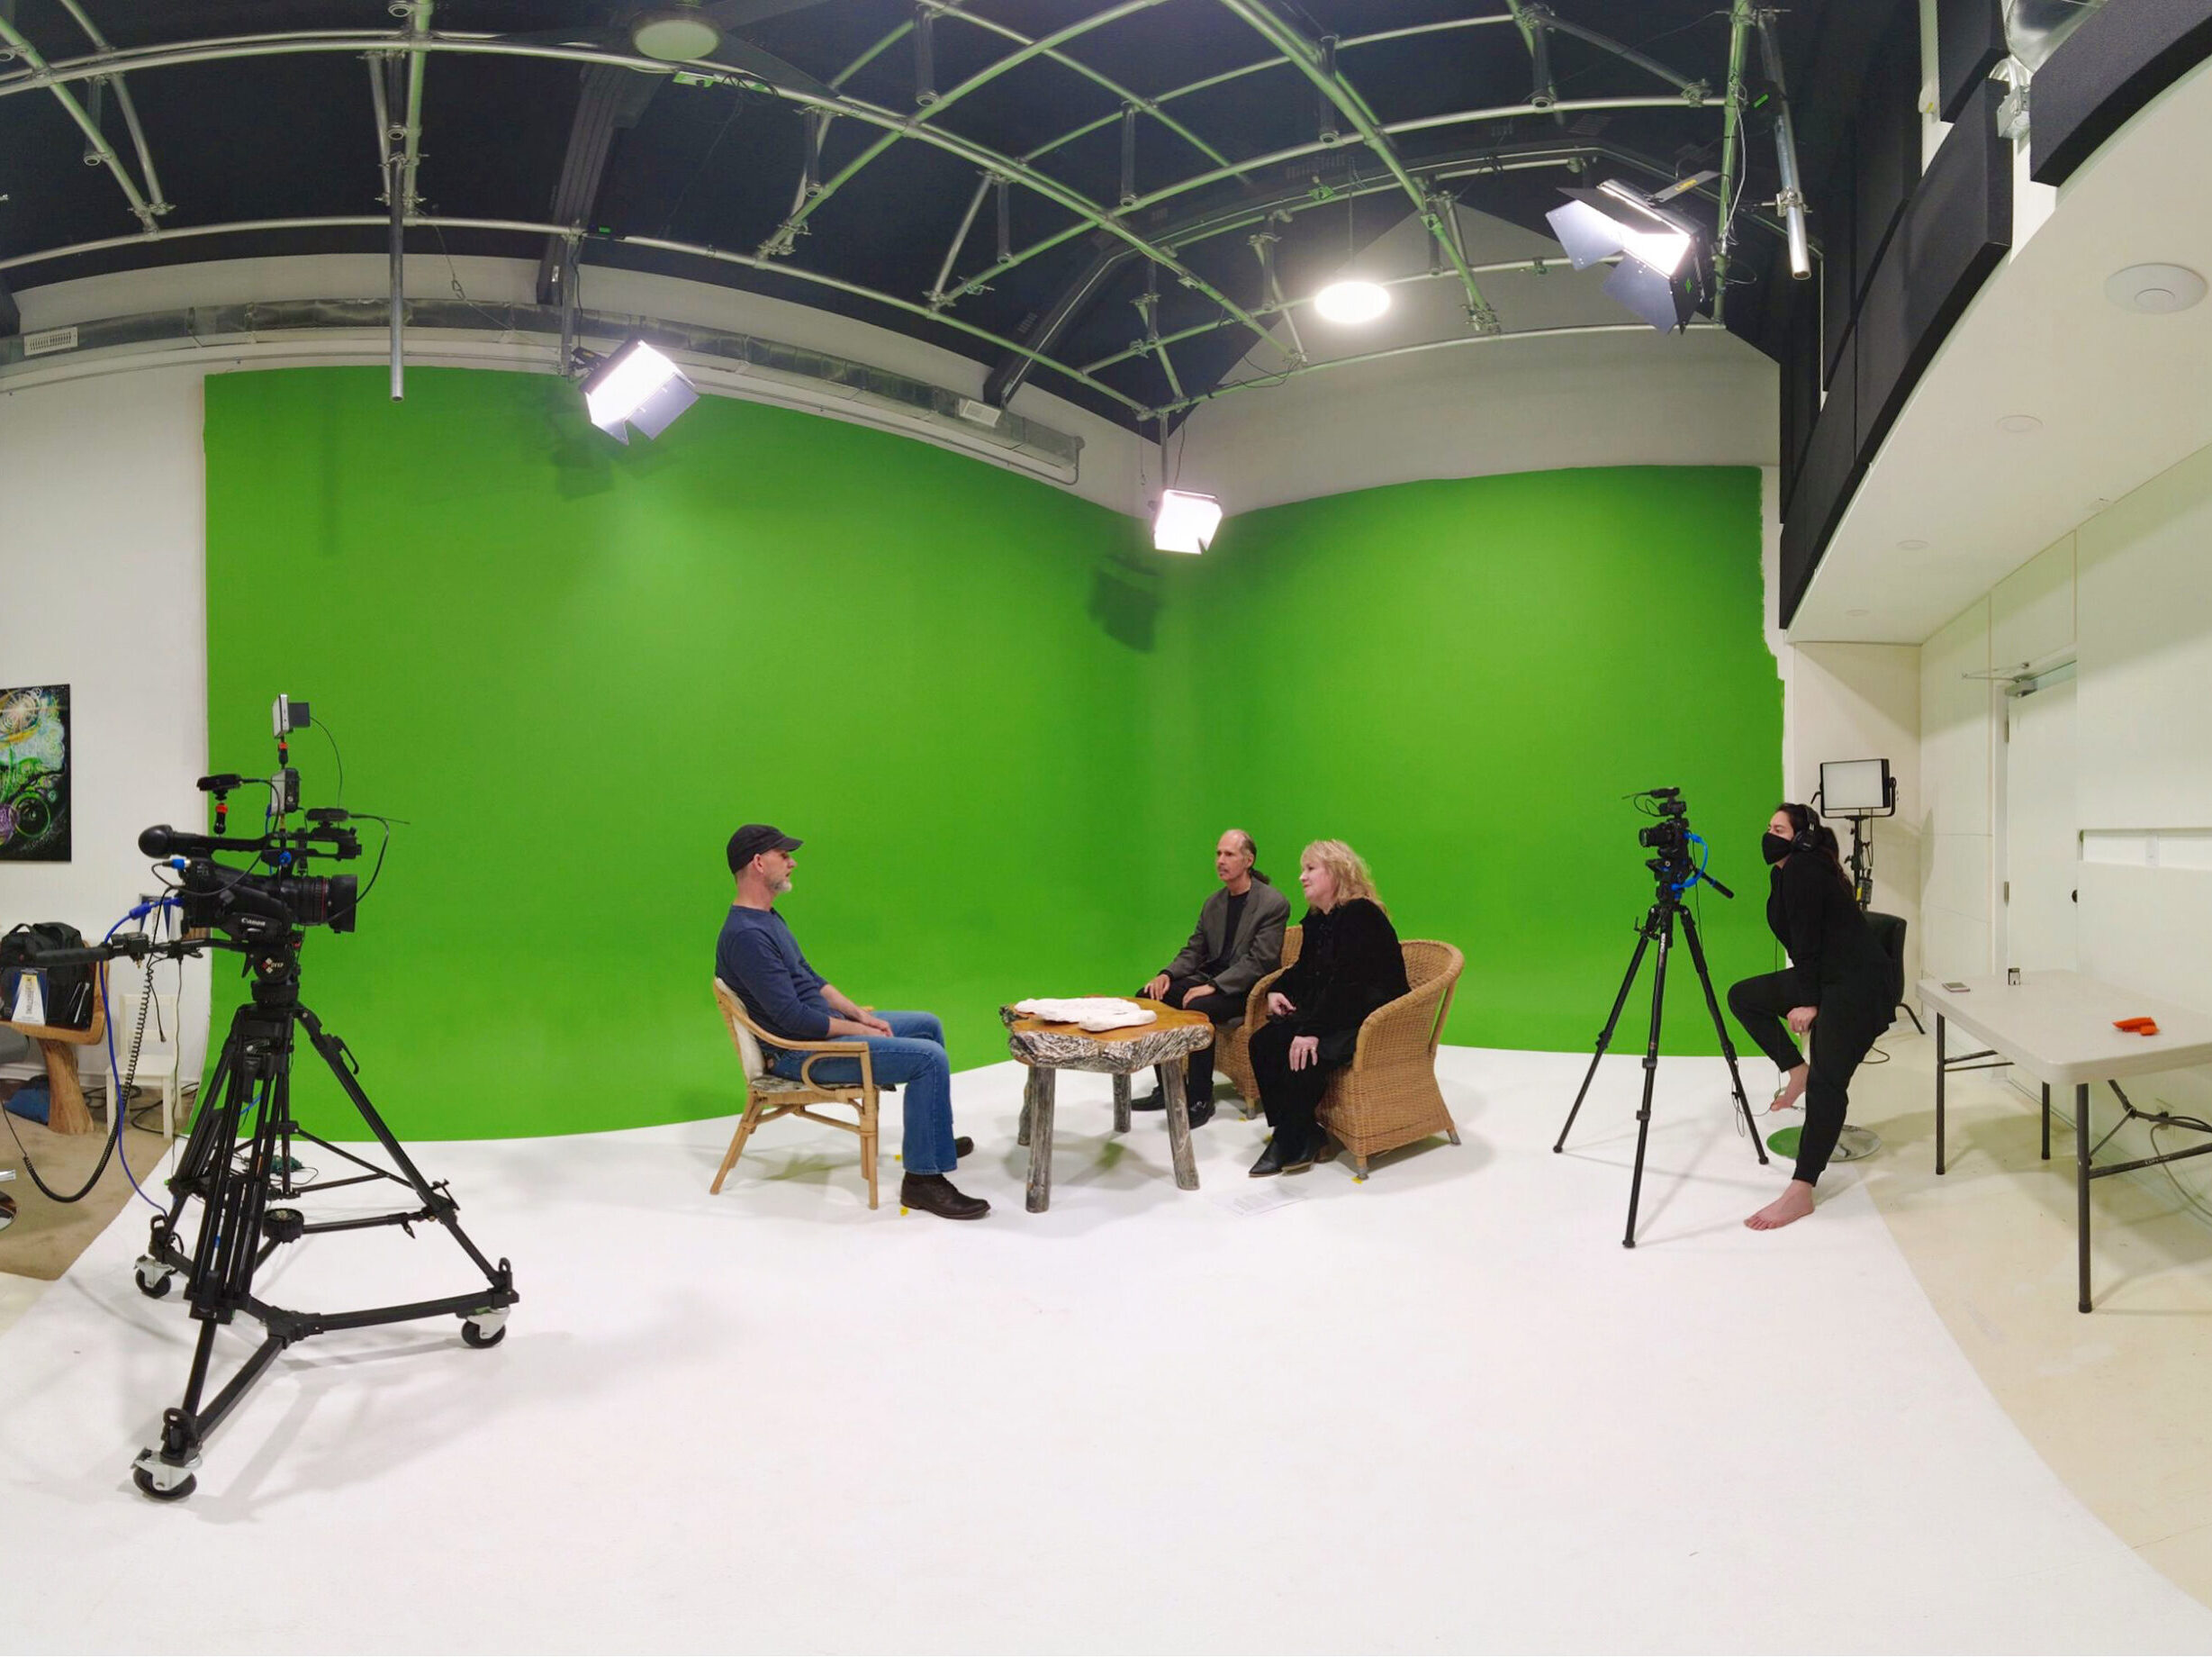 Markham video film studio rental, green screen cyc wall and on site video production services recording a Contact TV interview at Genie Lamp Studios.